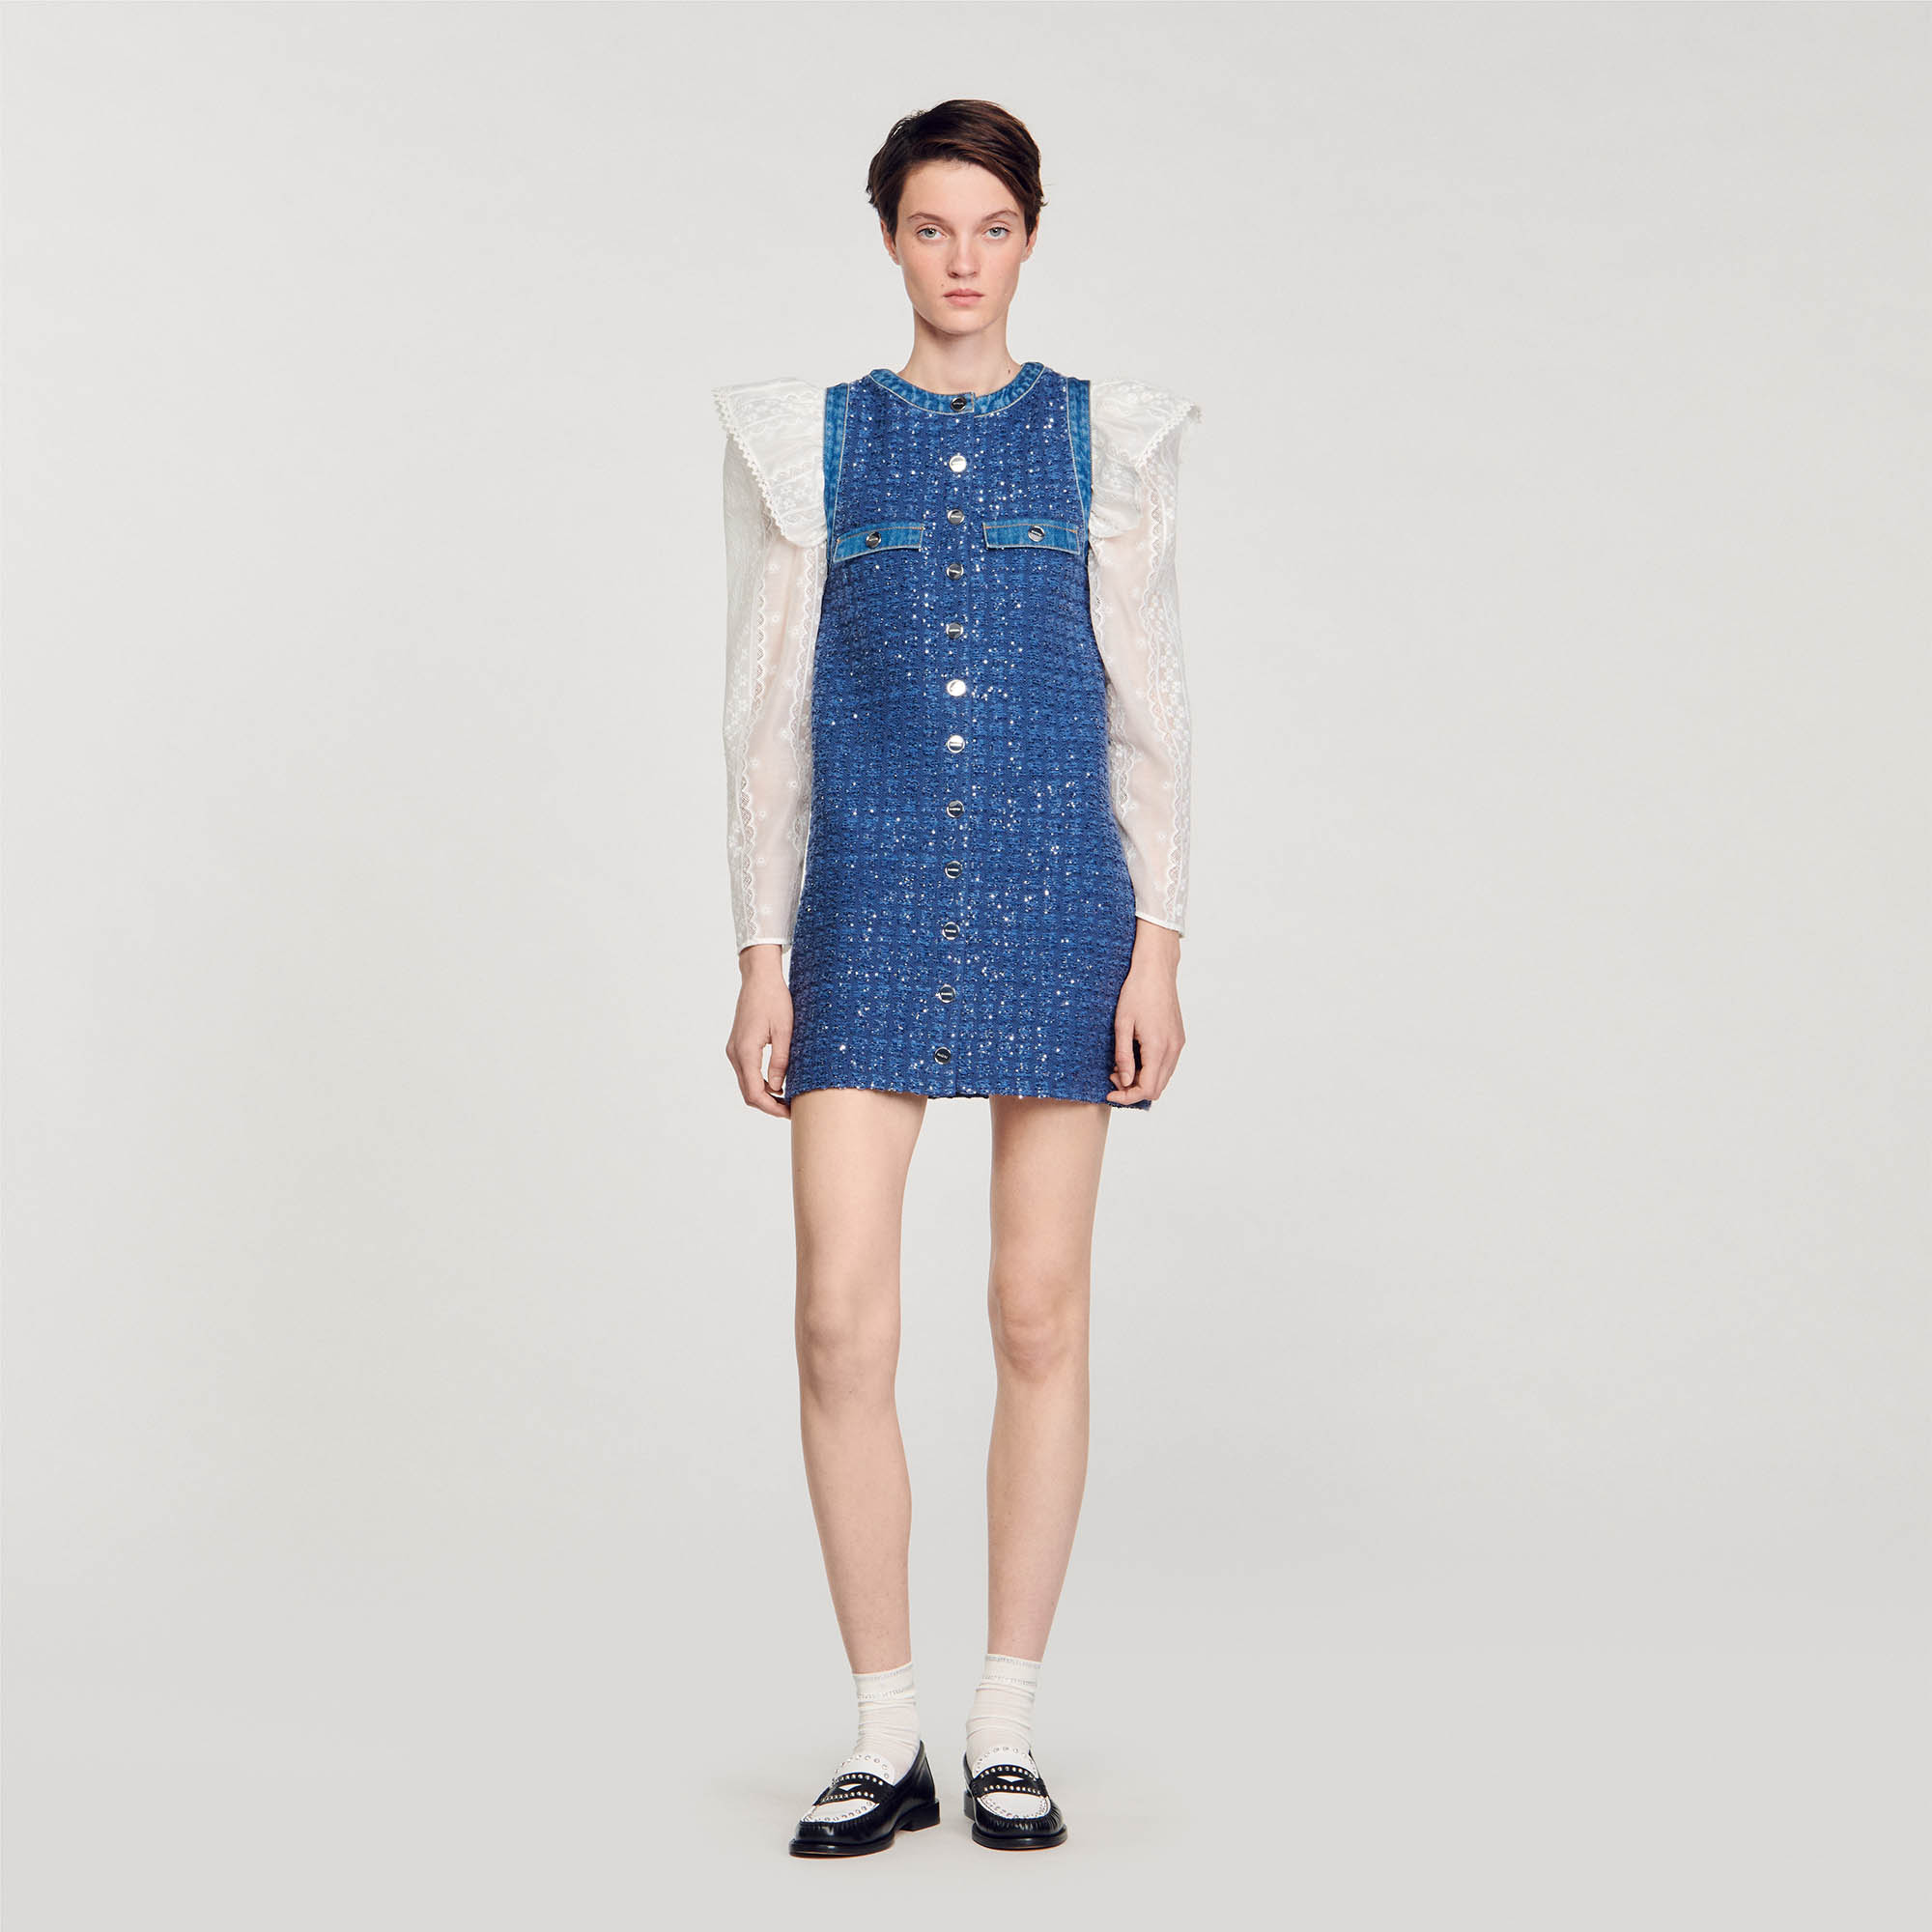 Sandro polyamide Sleeveless short trapeze dress in glittering tweed-effect decorative knit featuring a round neck, button fastening and welt pockets on the chest